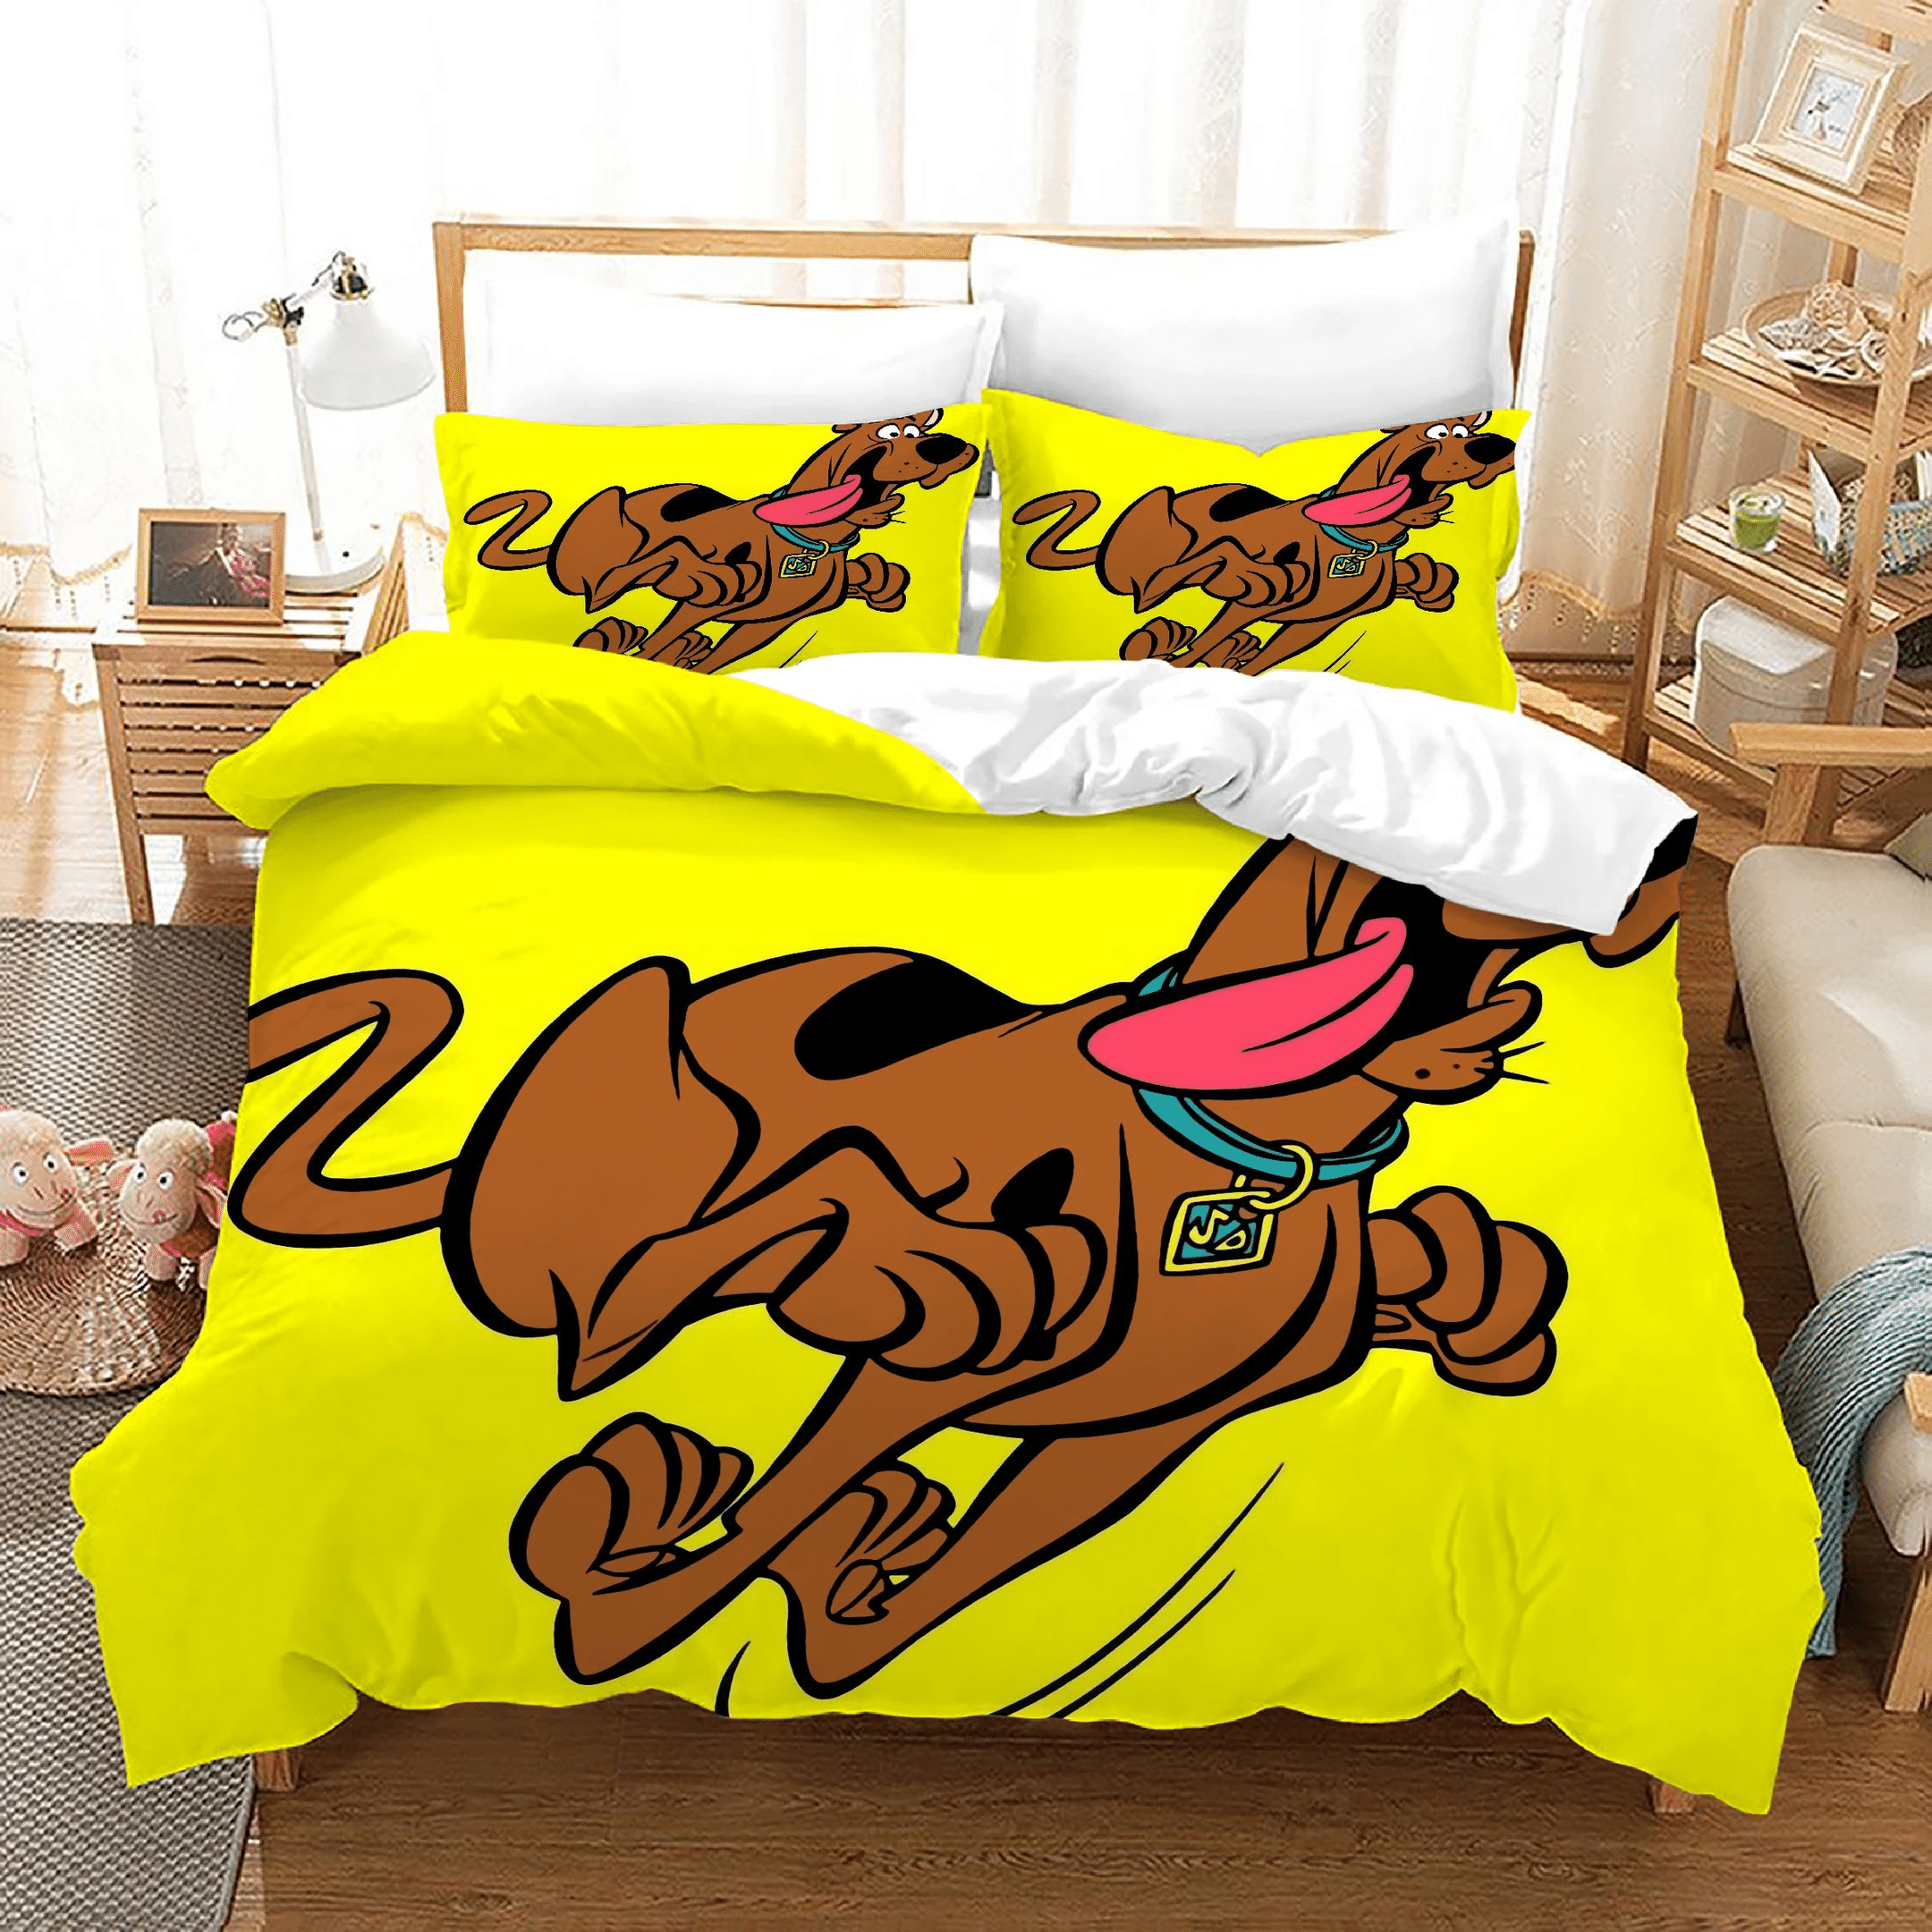 Scooby Doo 20 Duvet Cover Quilt Cover Pillowcase Bedding Sets